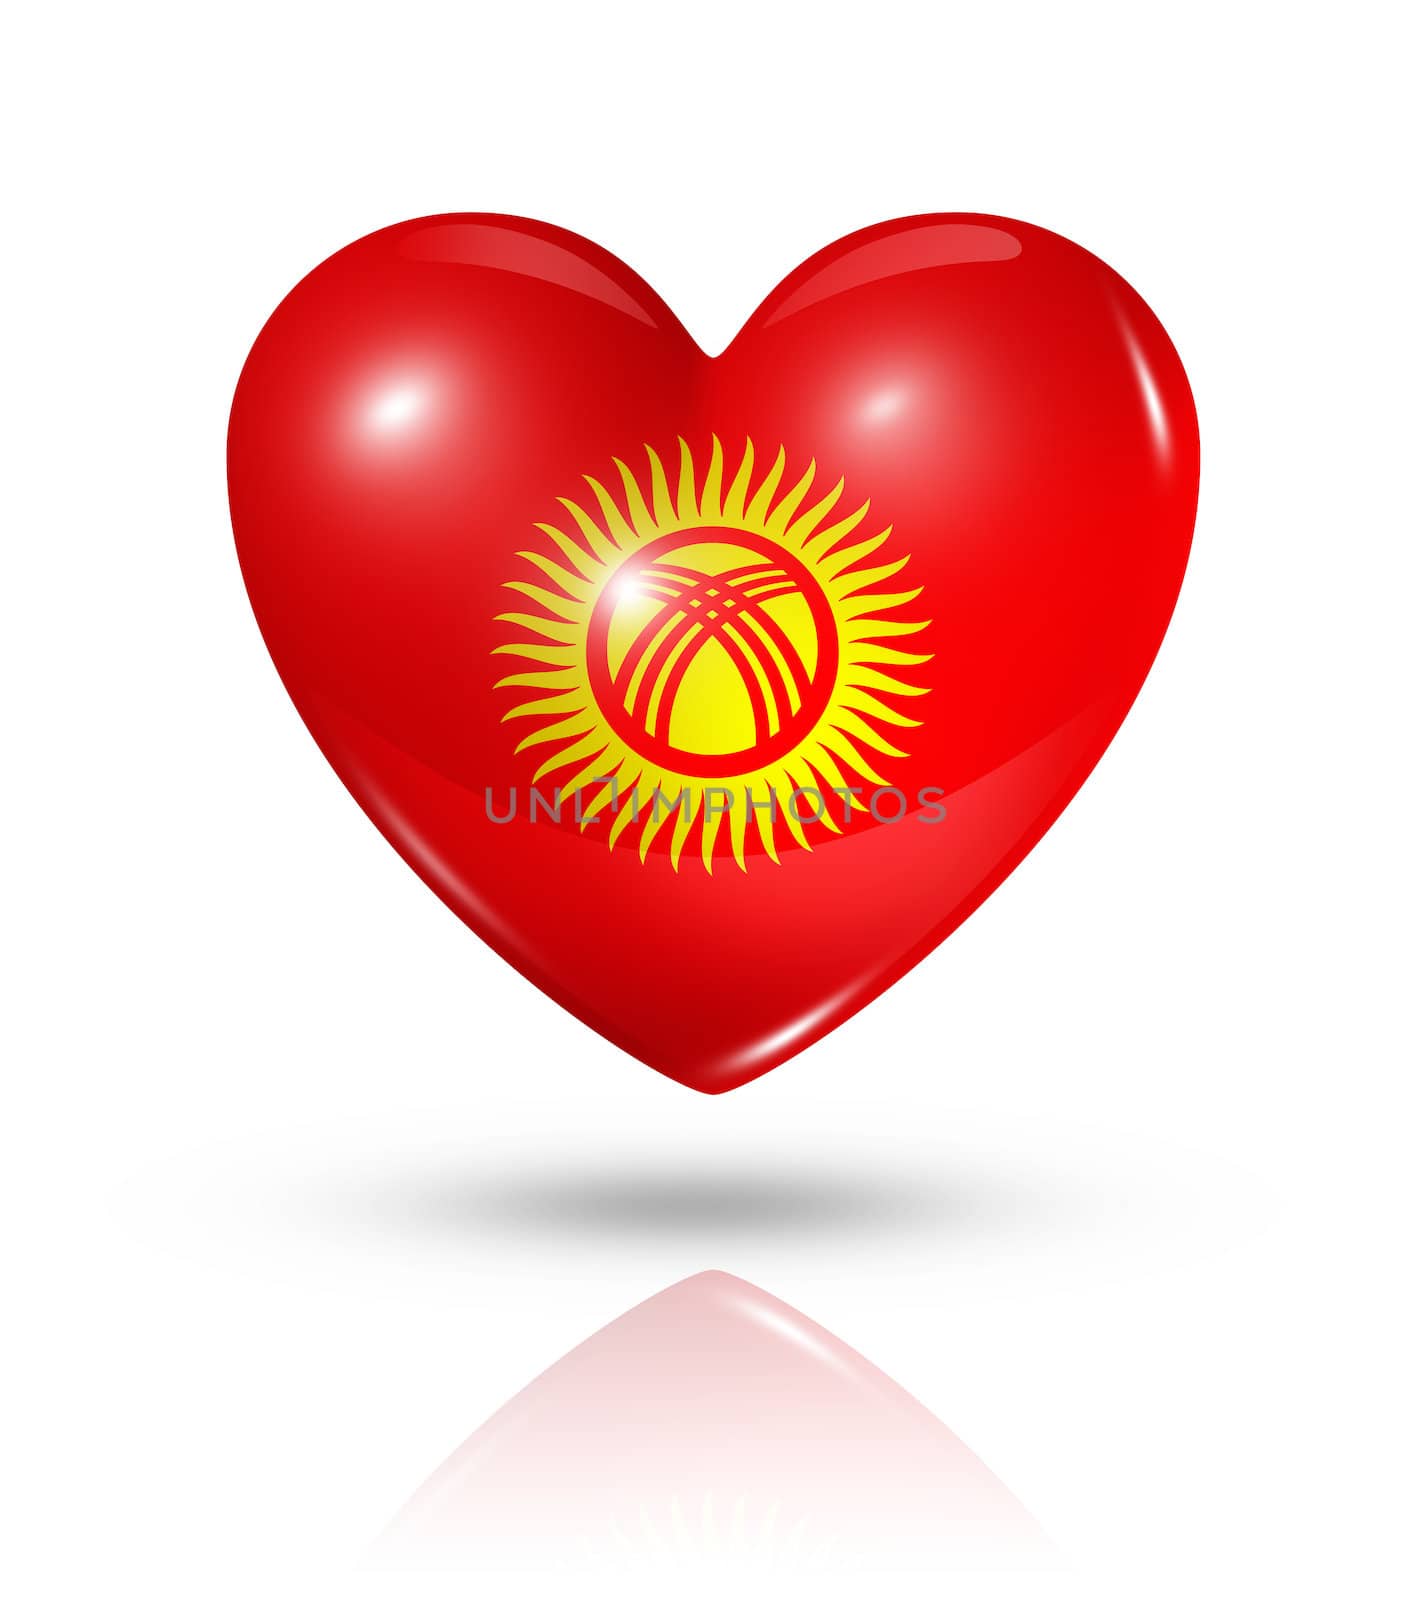 Love Kyrgyzstan, heart flag icon by daboost